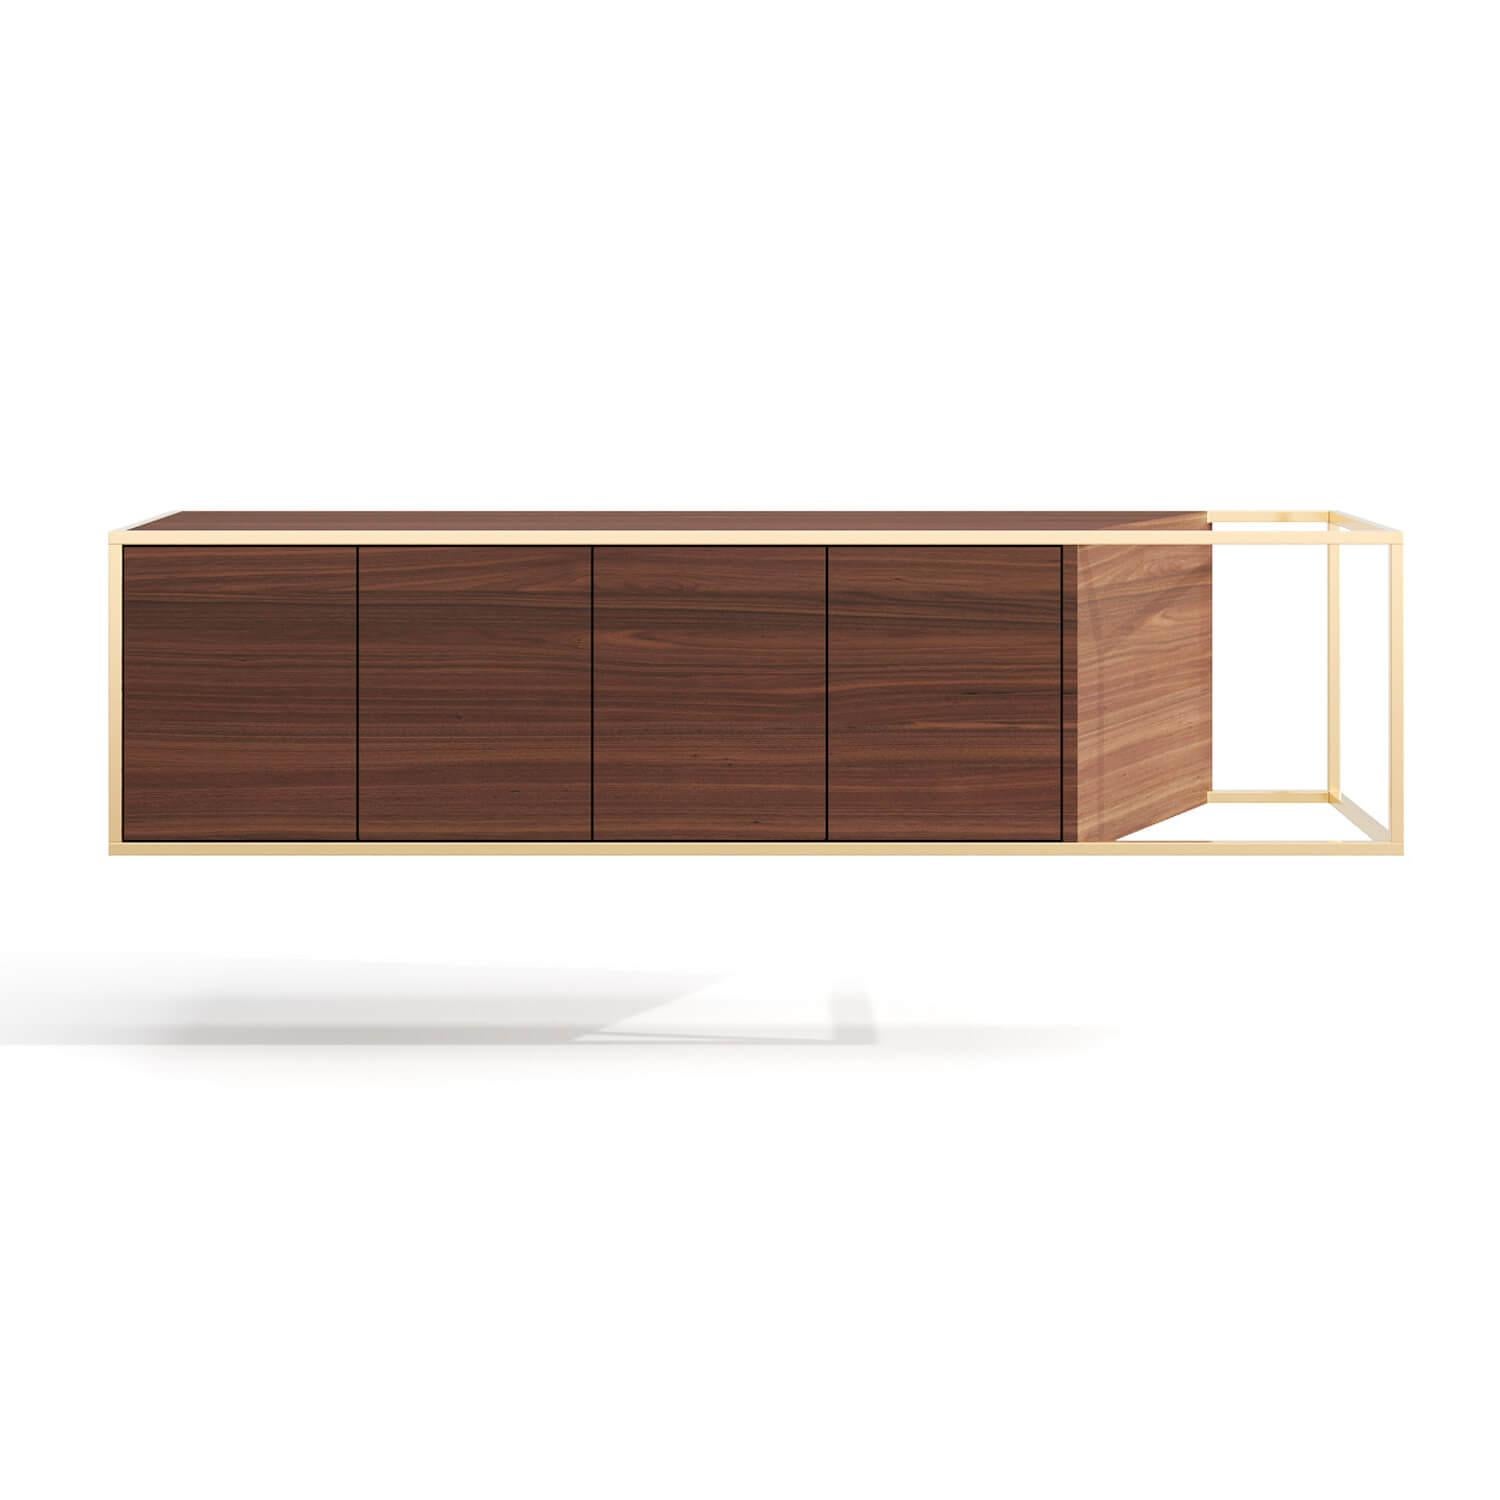 Portuguese Modern Minimalist Suspended Credenza Sideboard in Walnut Wood and Brushed Brass For Sale